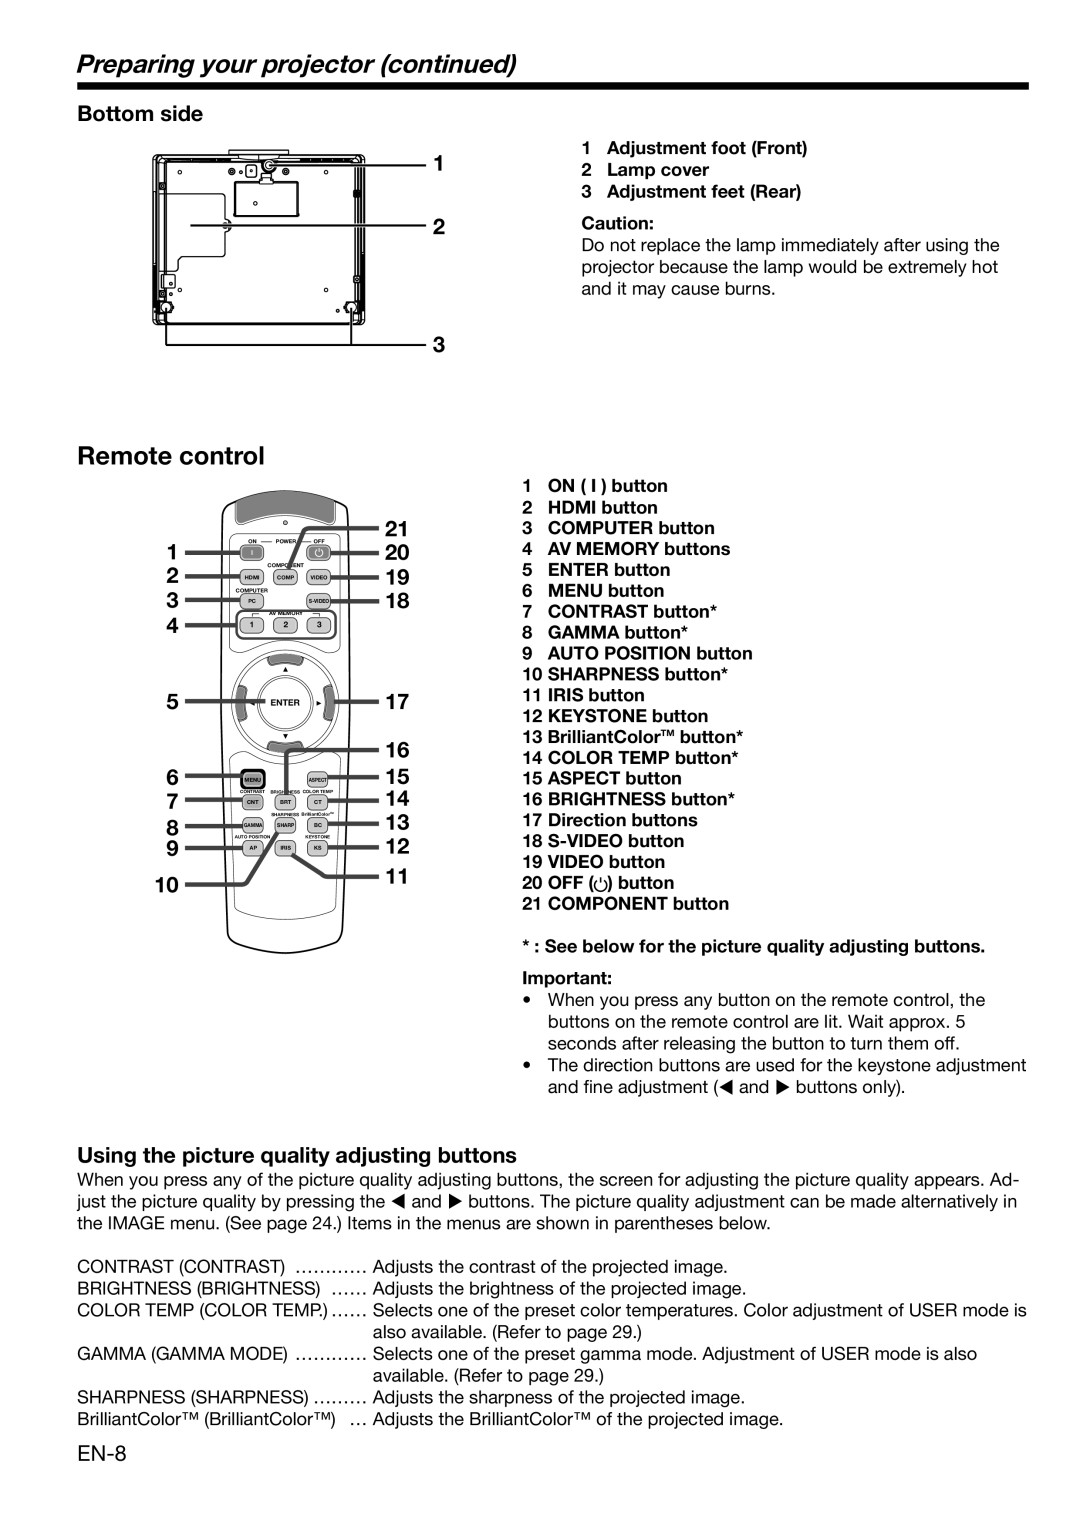 Mitsubishi Electronics HC3100 user manual Preparing your projector continued, Remote control, Bottom side, 1011 